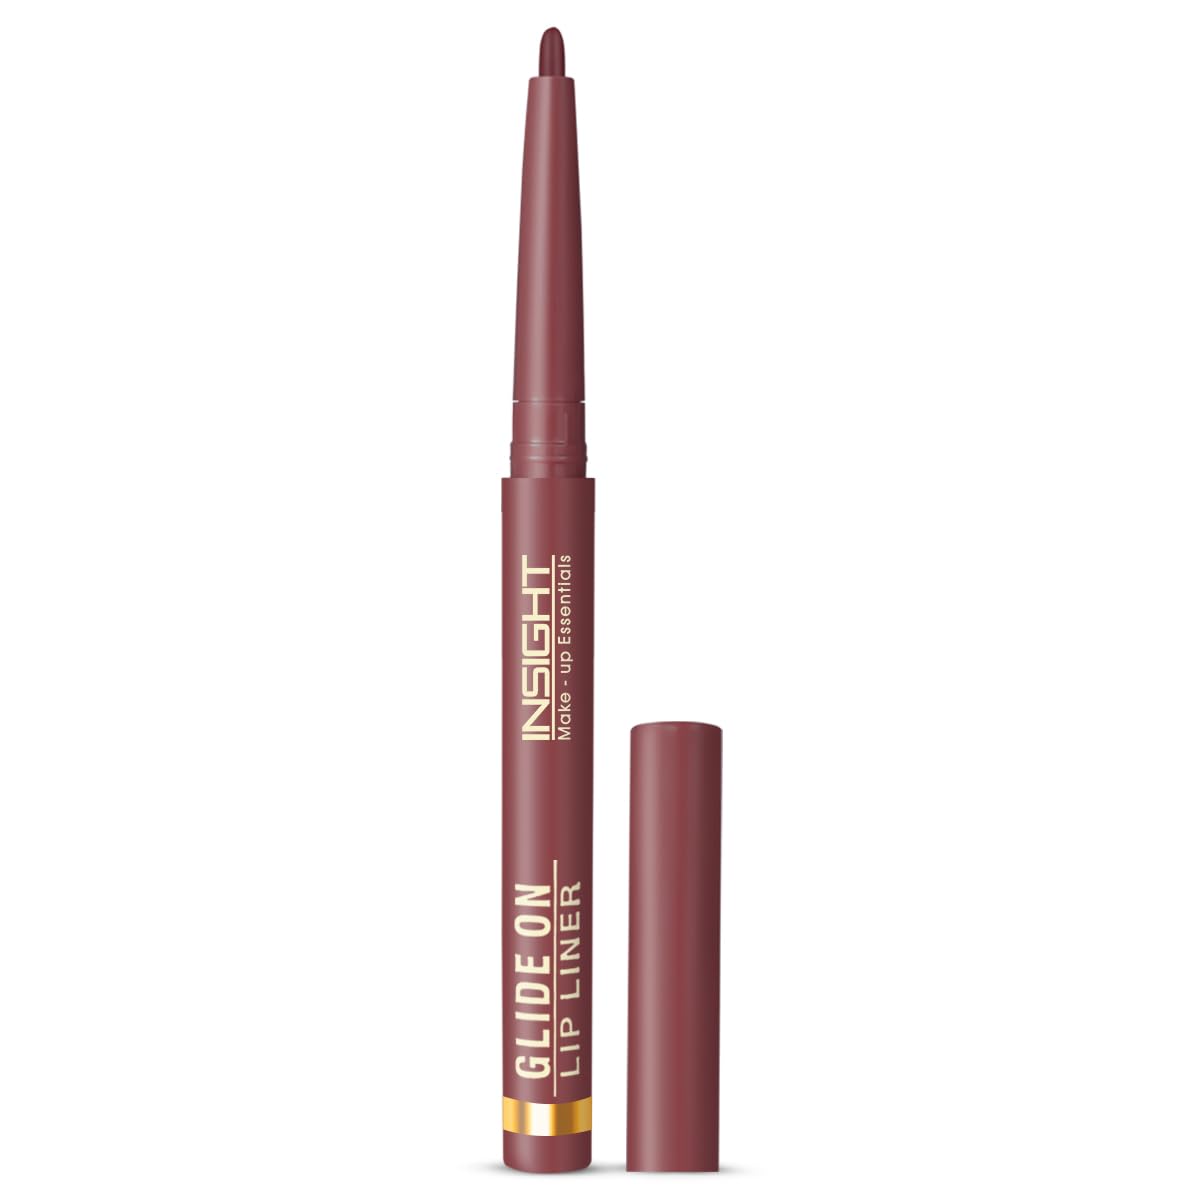 Insight Cosmetics Glide On Lip Liner | One Swipe Smooth Application | Long Lasting Lip Pencil,0.3 gm,18